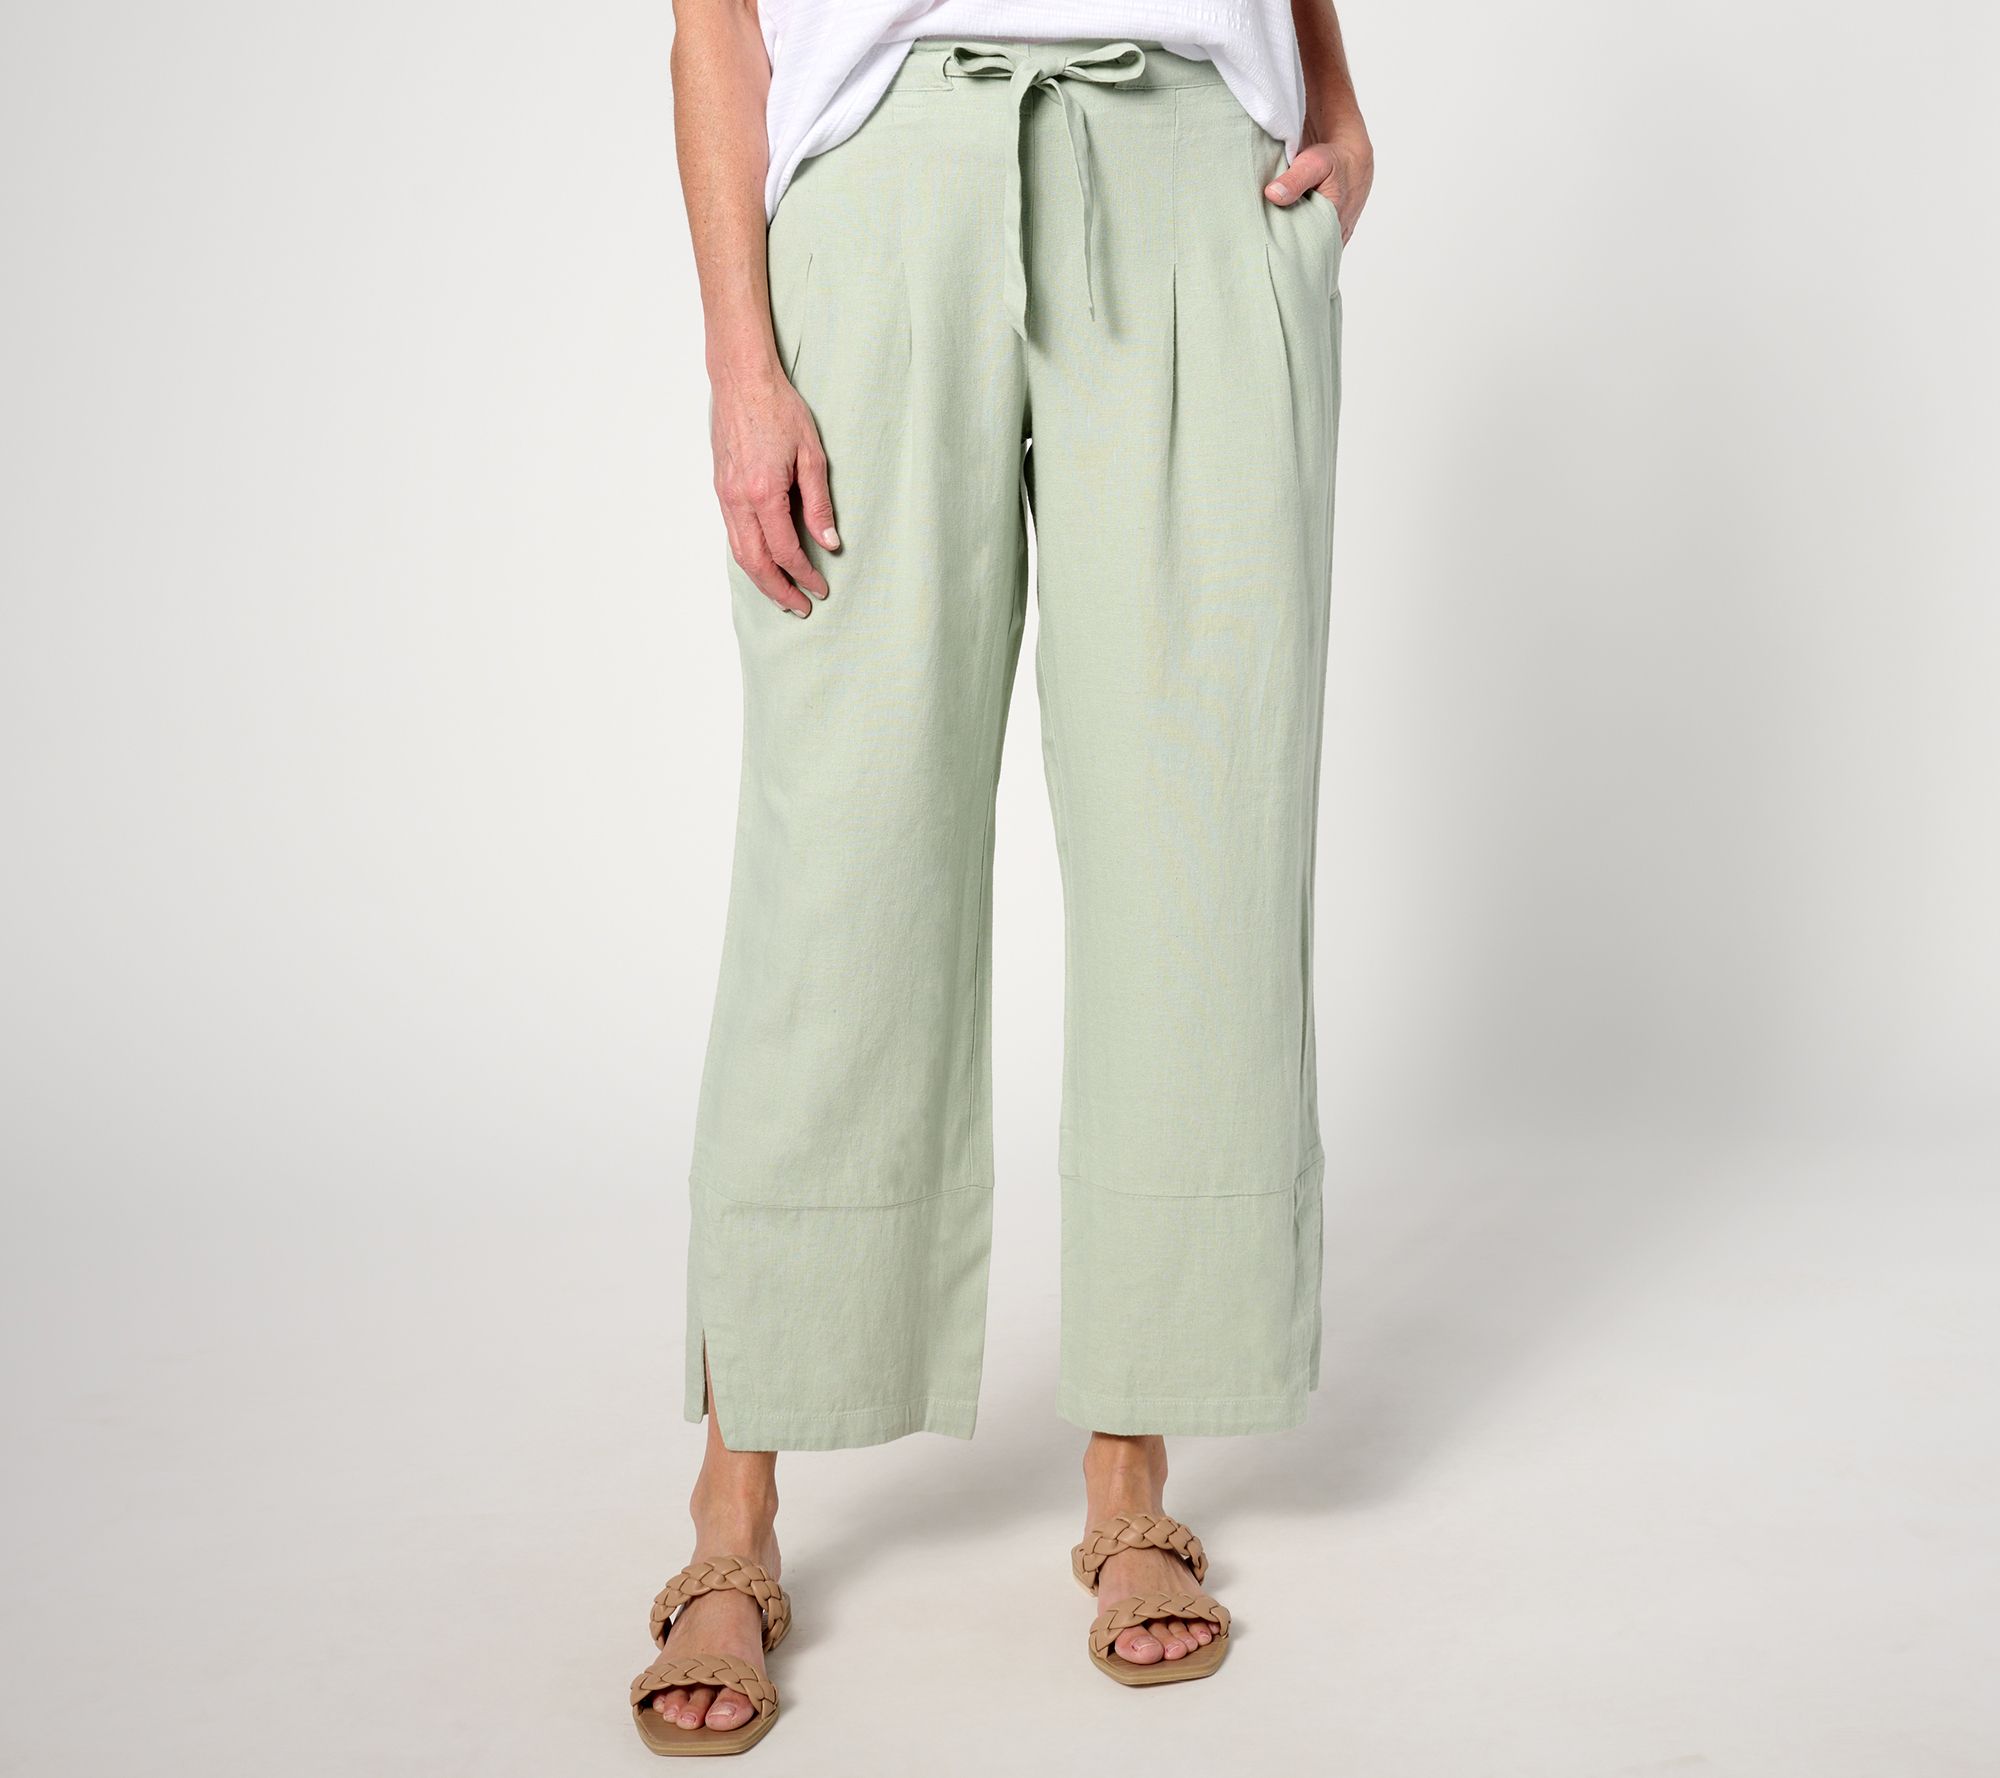 Women's Pull-on-Pants  Wide Leg or Cropped Pants 